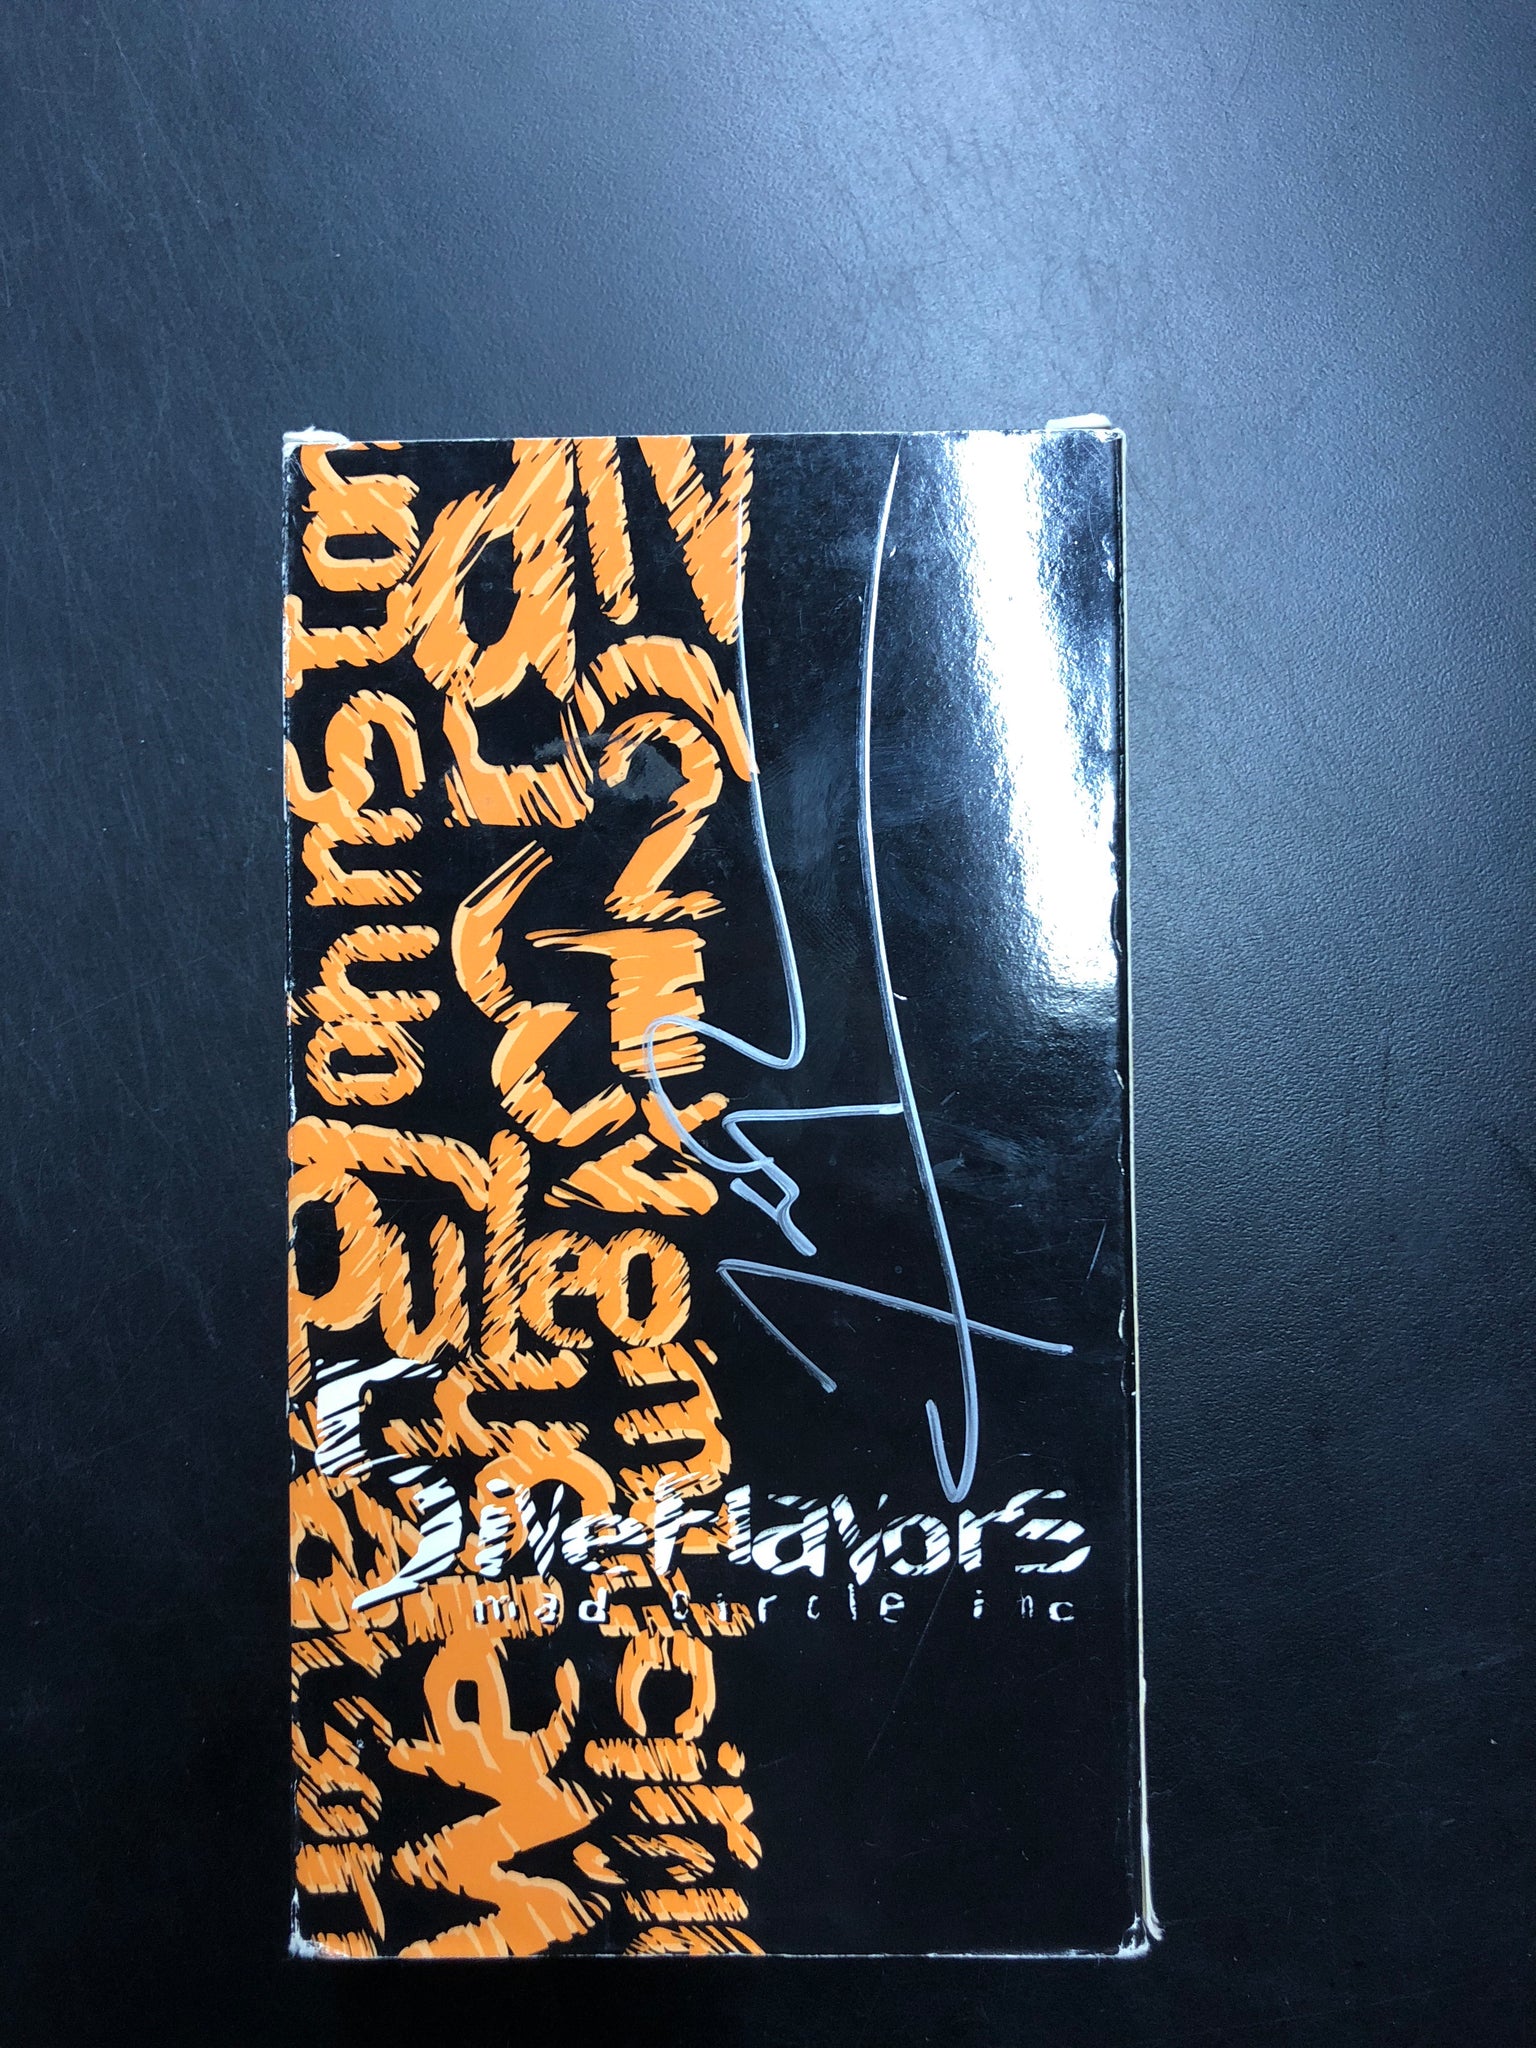 5 Flavors mad circle inc. VHS SIGNED BY KARL WATSON